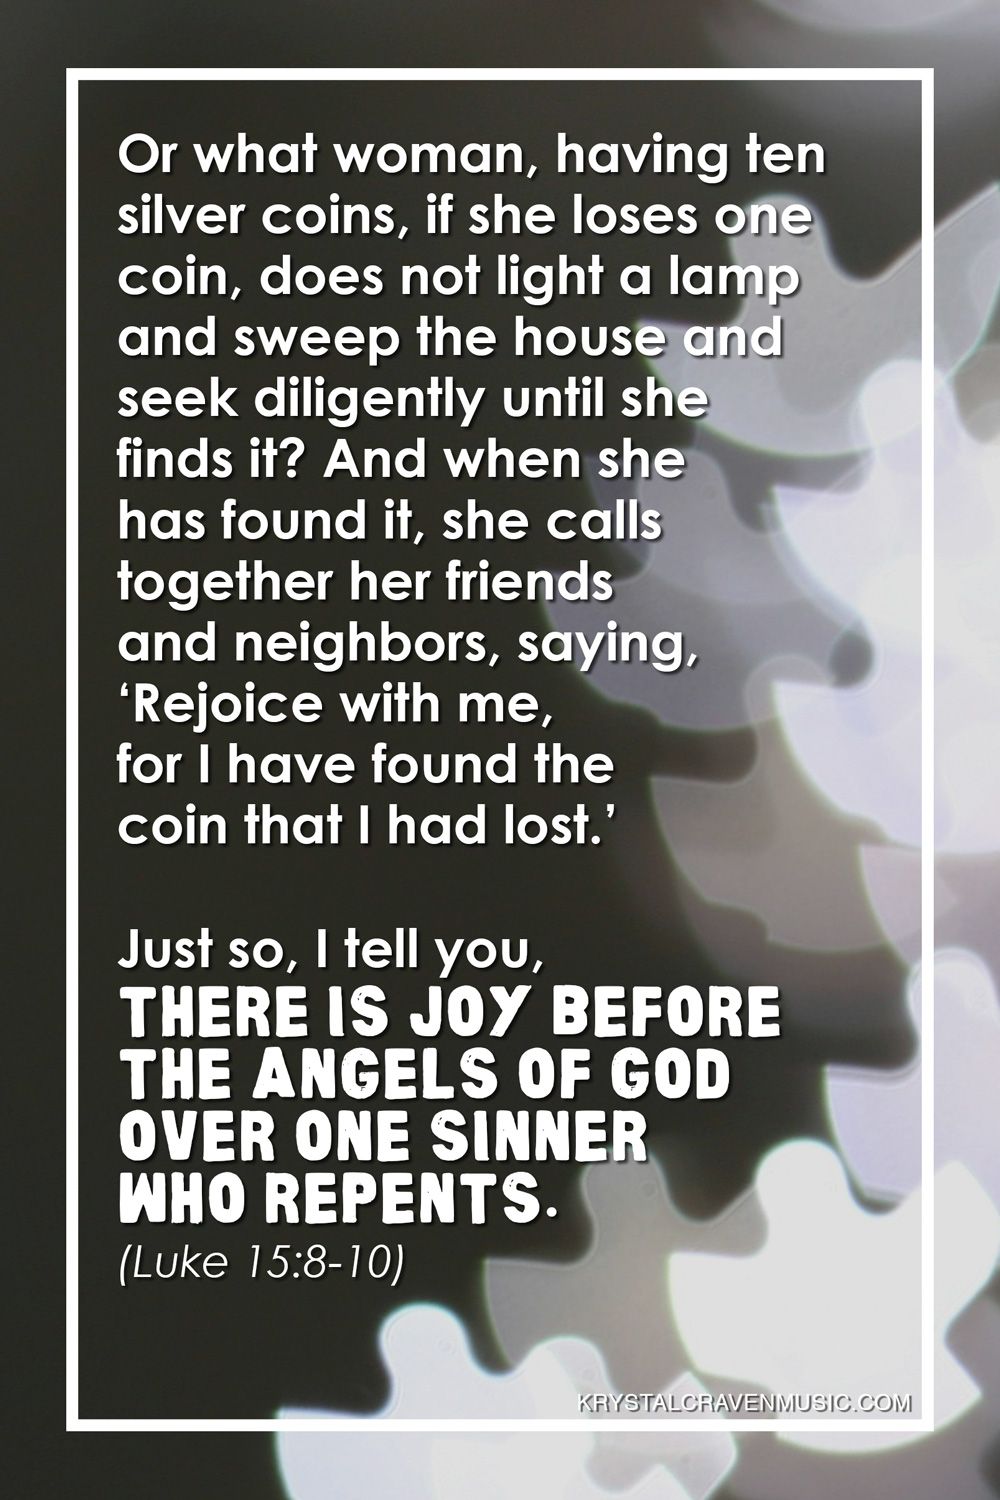 The text from Luke 15:8-10 that reads "Or what woman, having ten silver coins, if she loses one coin, does not light a lamp and sweep the house and seek diligently until she finds it? And when she has found it, she calls together her friends and neighbors, saying, ‘Rejoice with me, for I have found the coin that I had lost.’ Just so, I tell you, there is joy before the angels of God over one sinner who repents." over an ambiguous image with many oddly shaped out of focus light artifacts that looks somewhat like angels.